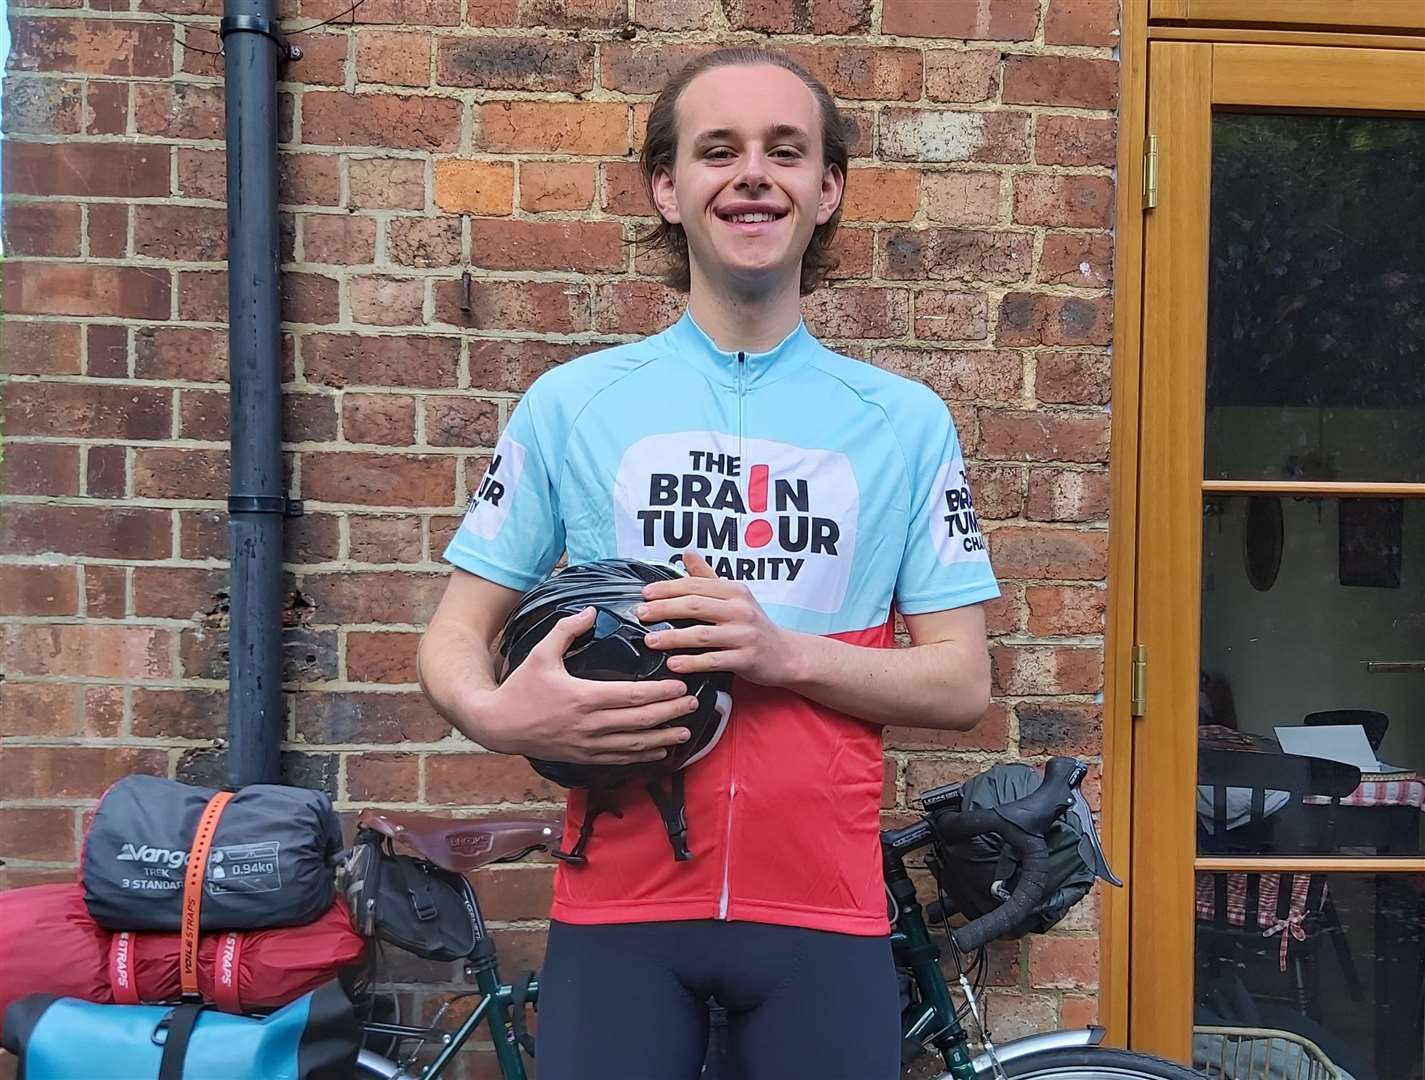 Tunbridge Wells teenager Jeremy Daubeny will be taking on a cycling challenge for two charities close to his heart